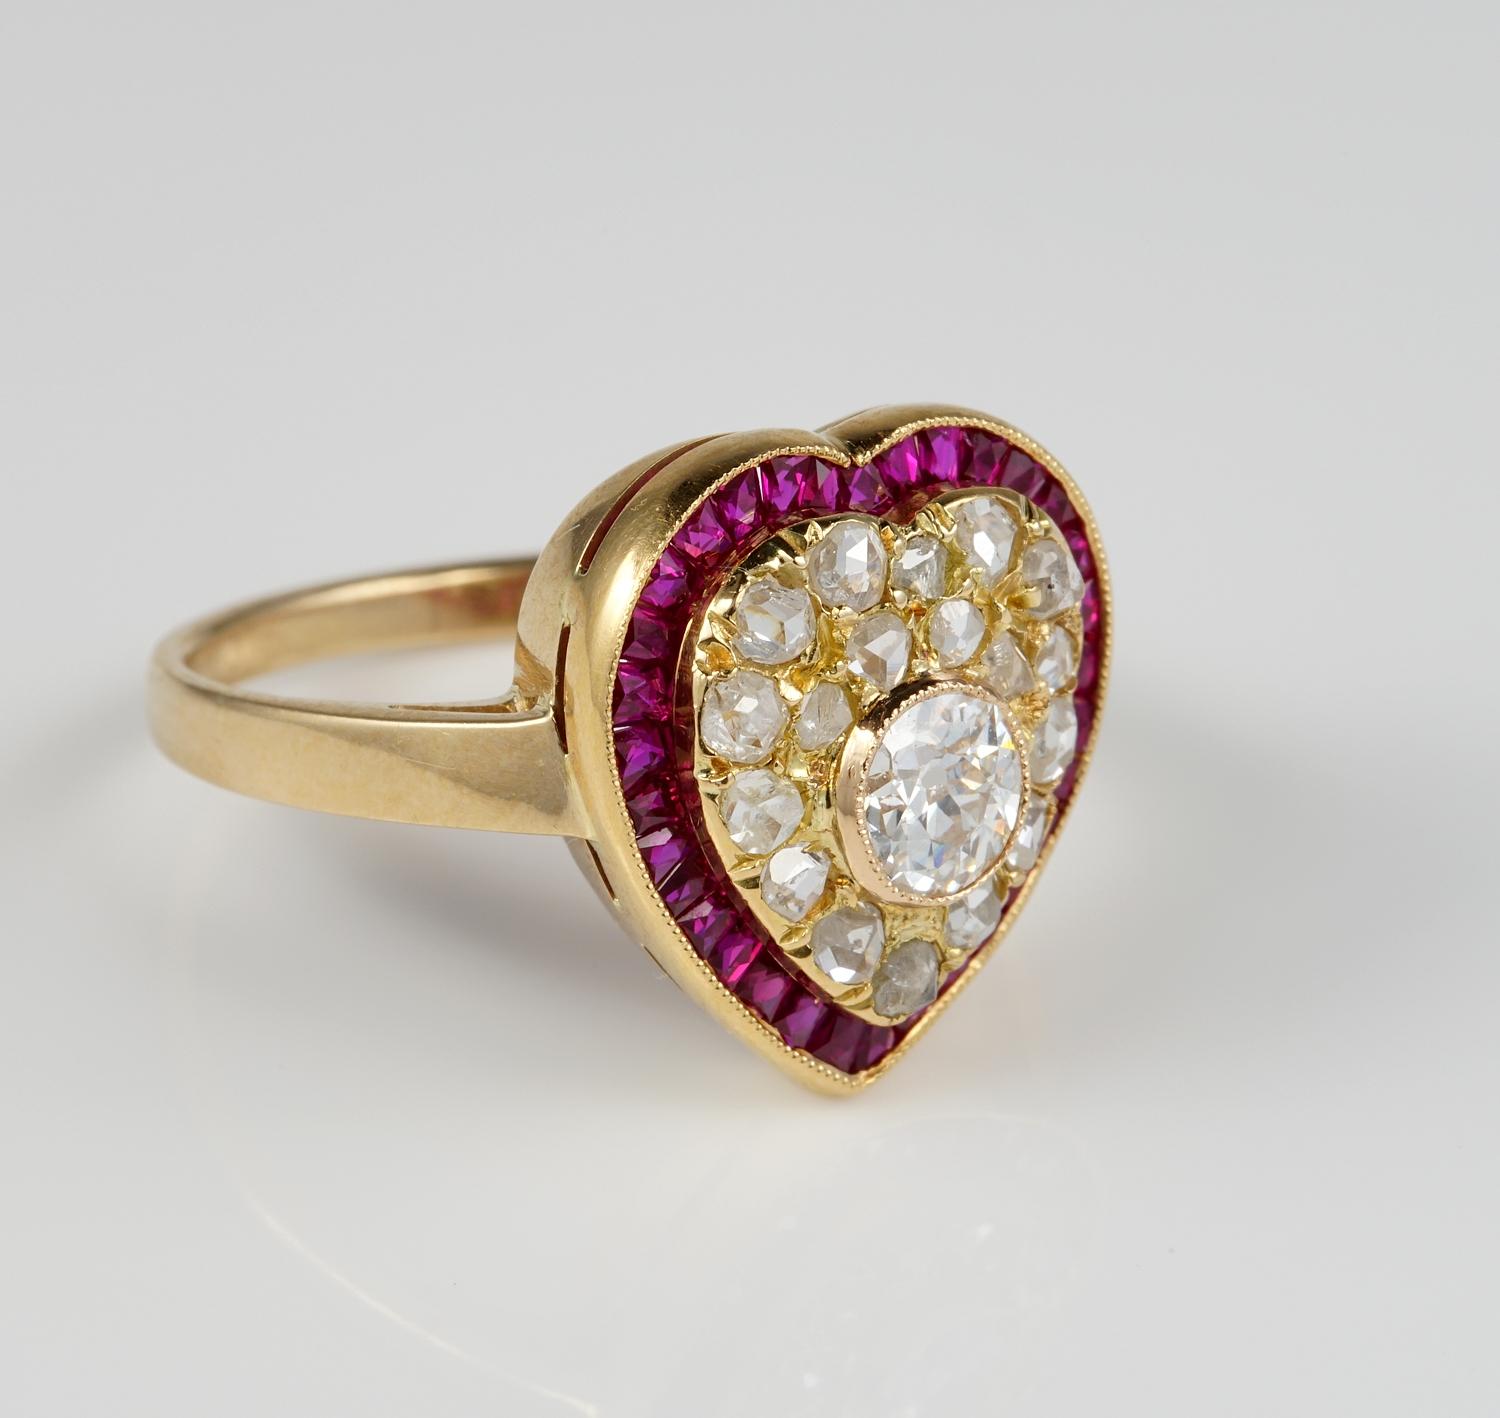 Victorian Romanticism
A beautiful example of Victorian period heart ring, romantic expression of the era to symbolize love and eternal love
Beautifully designed , glorious Victorian workmanship, 1880/90 ca.
18 Kt gold, marked
Principle Diamond is is